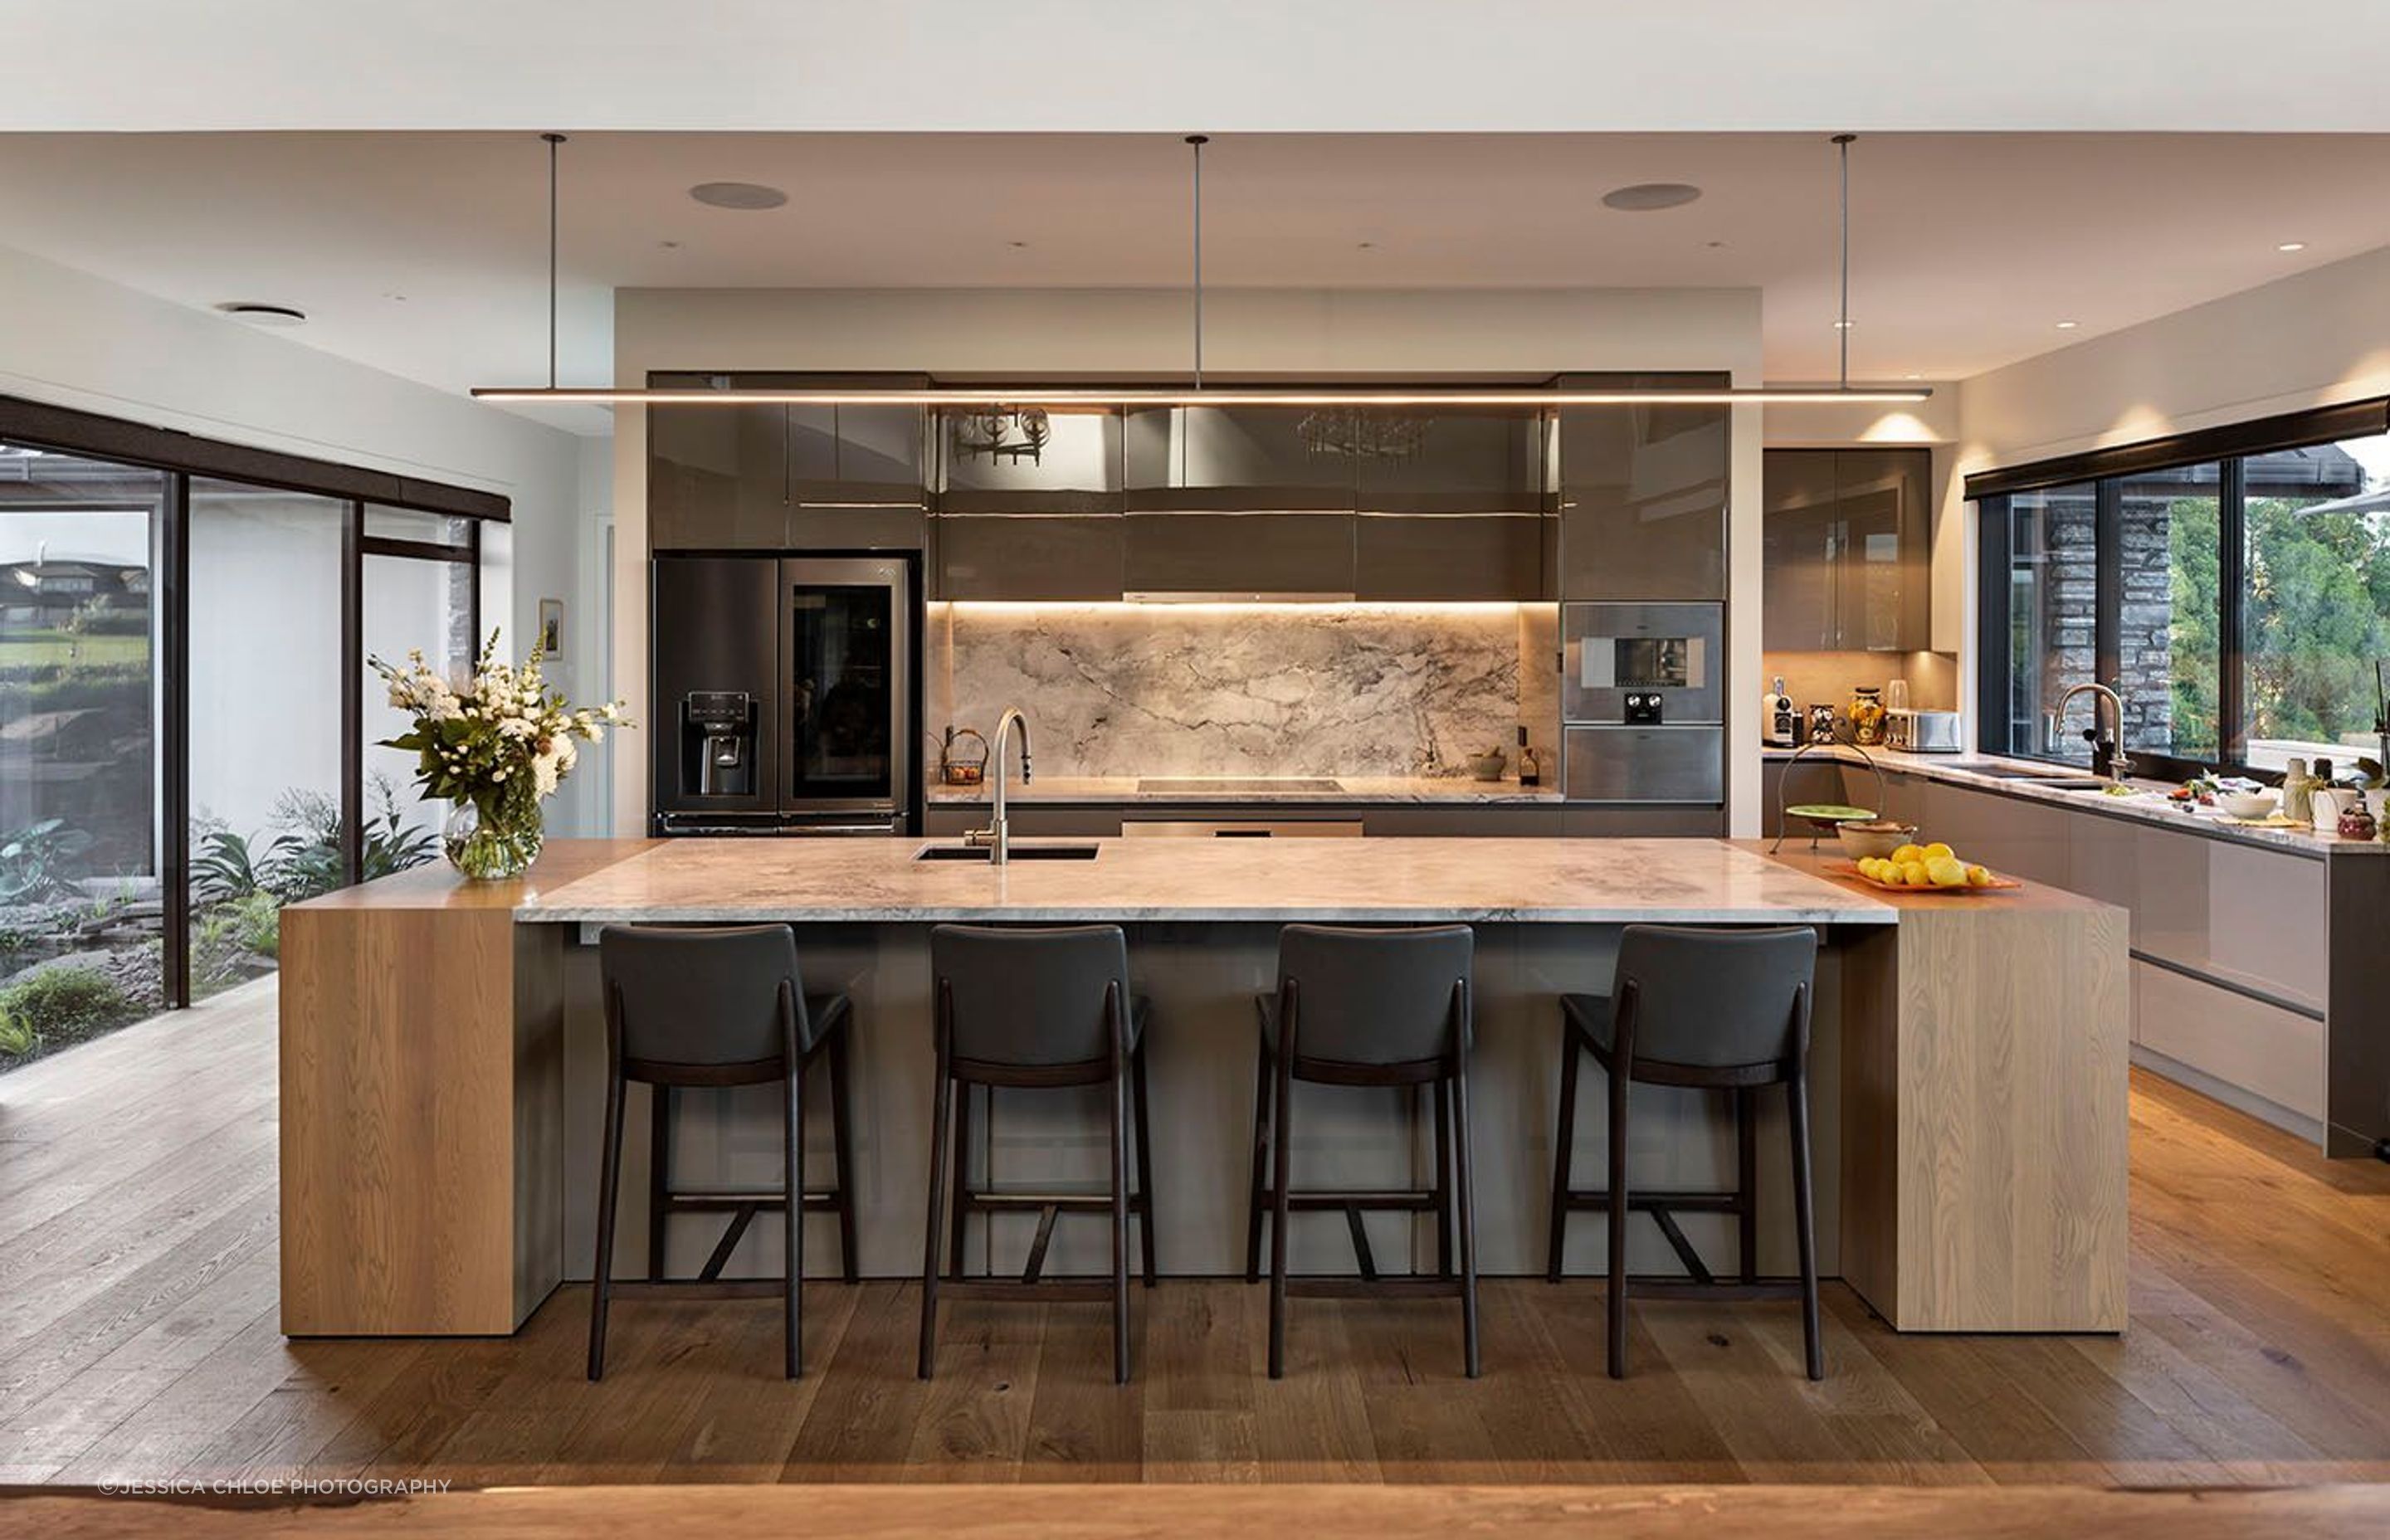 Open kitchen offers social and casual dining in addition to the formal spaces